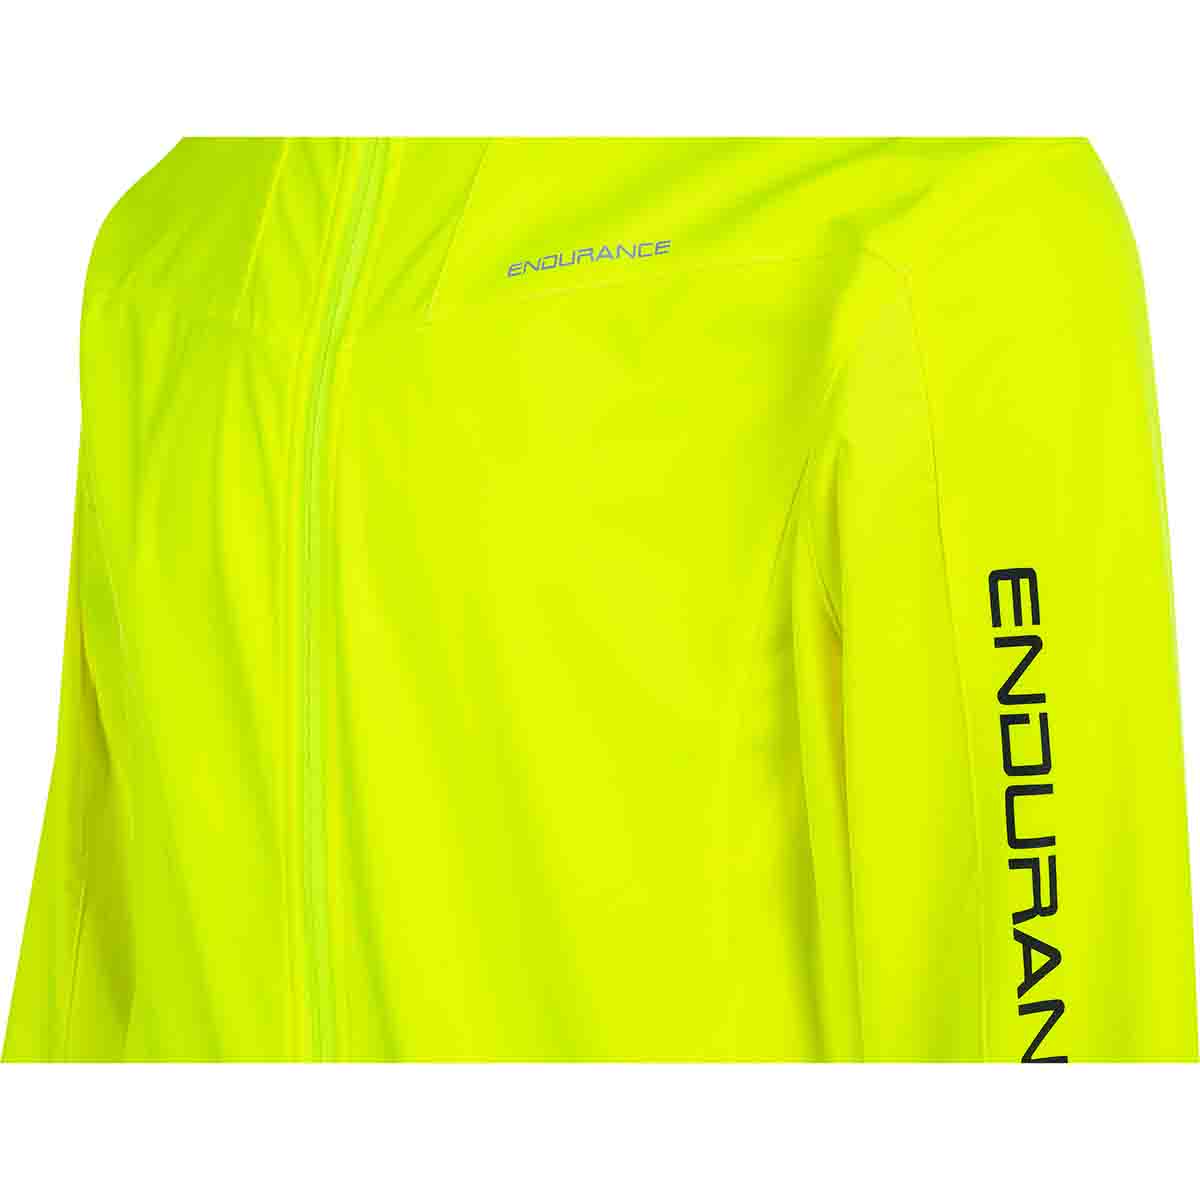 Whistler Outdoors Cluson Membrane Cycling L/S Jacket | Mens